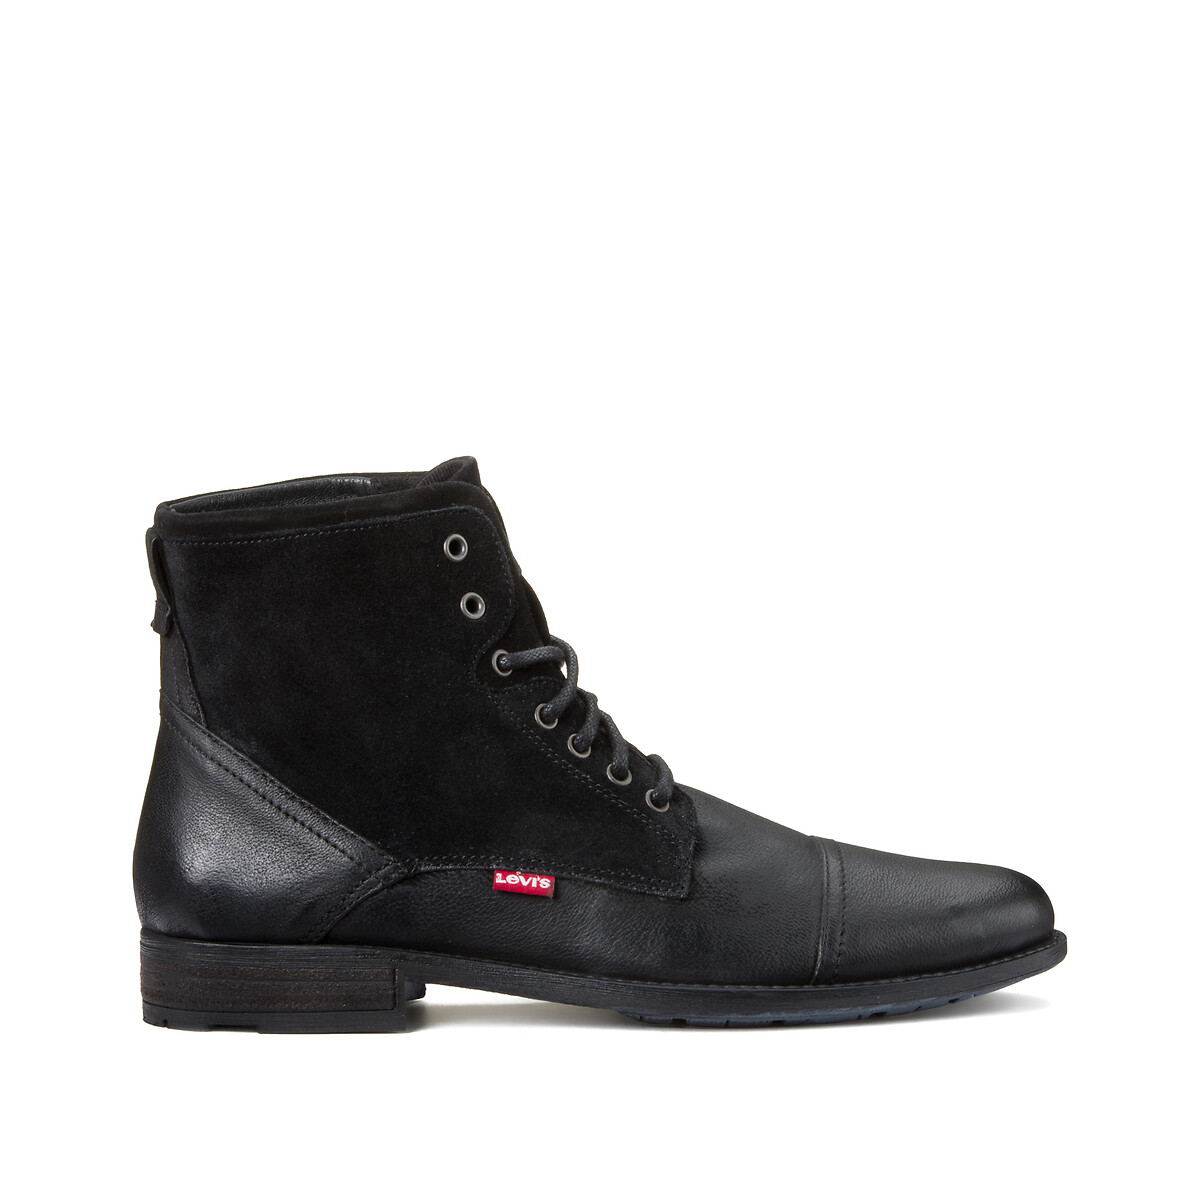 Fowler  ankle boots in suede/leather black Levi's | La Redoute